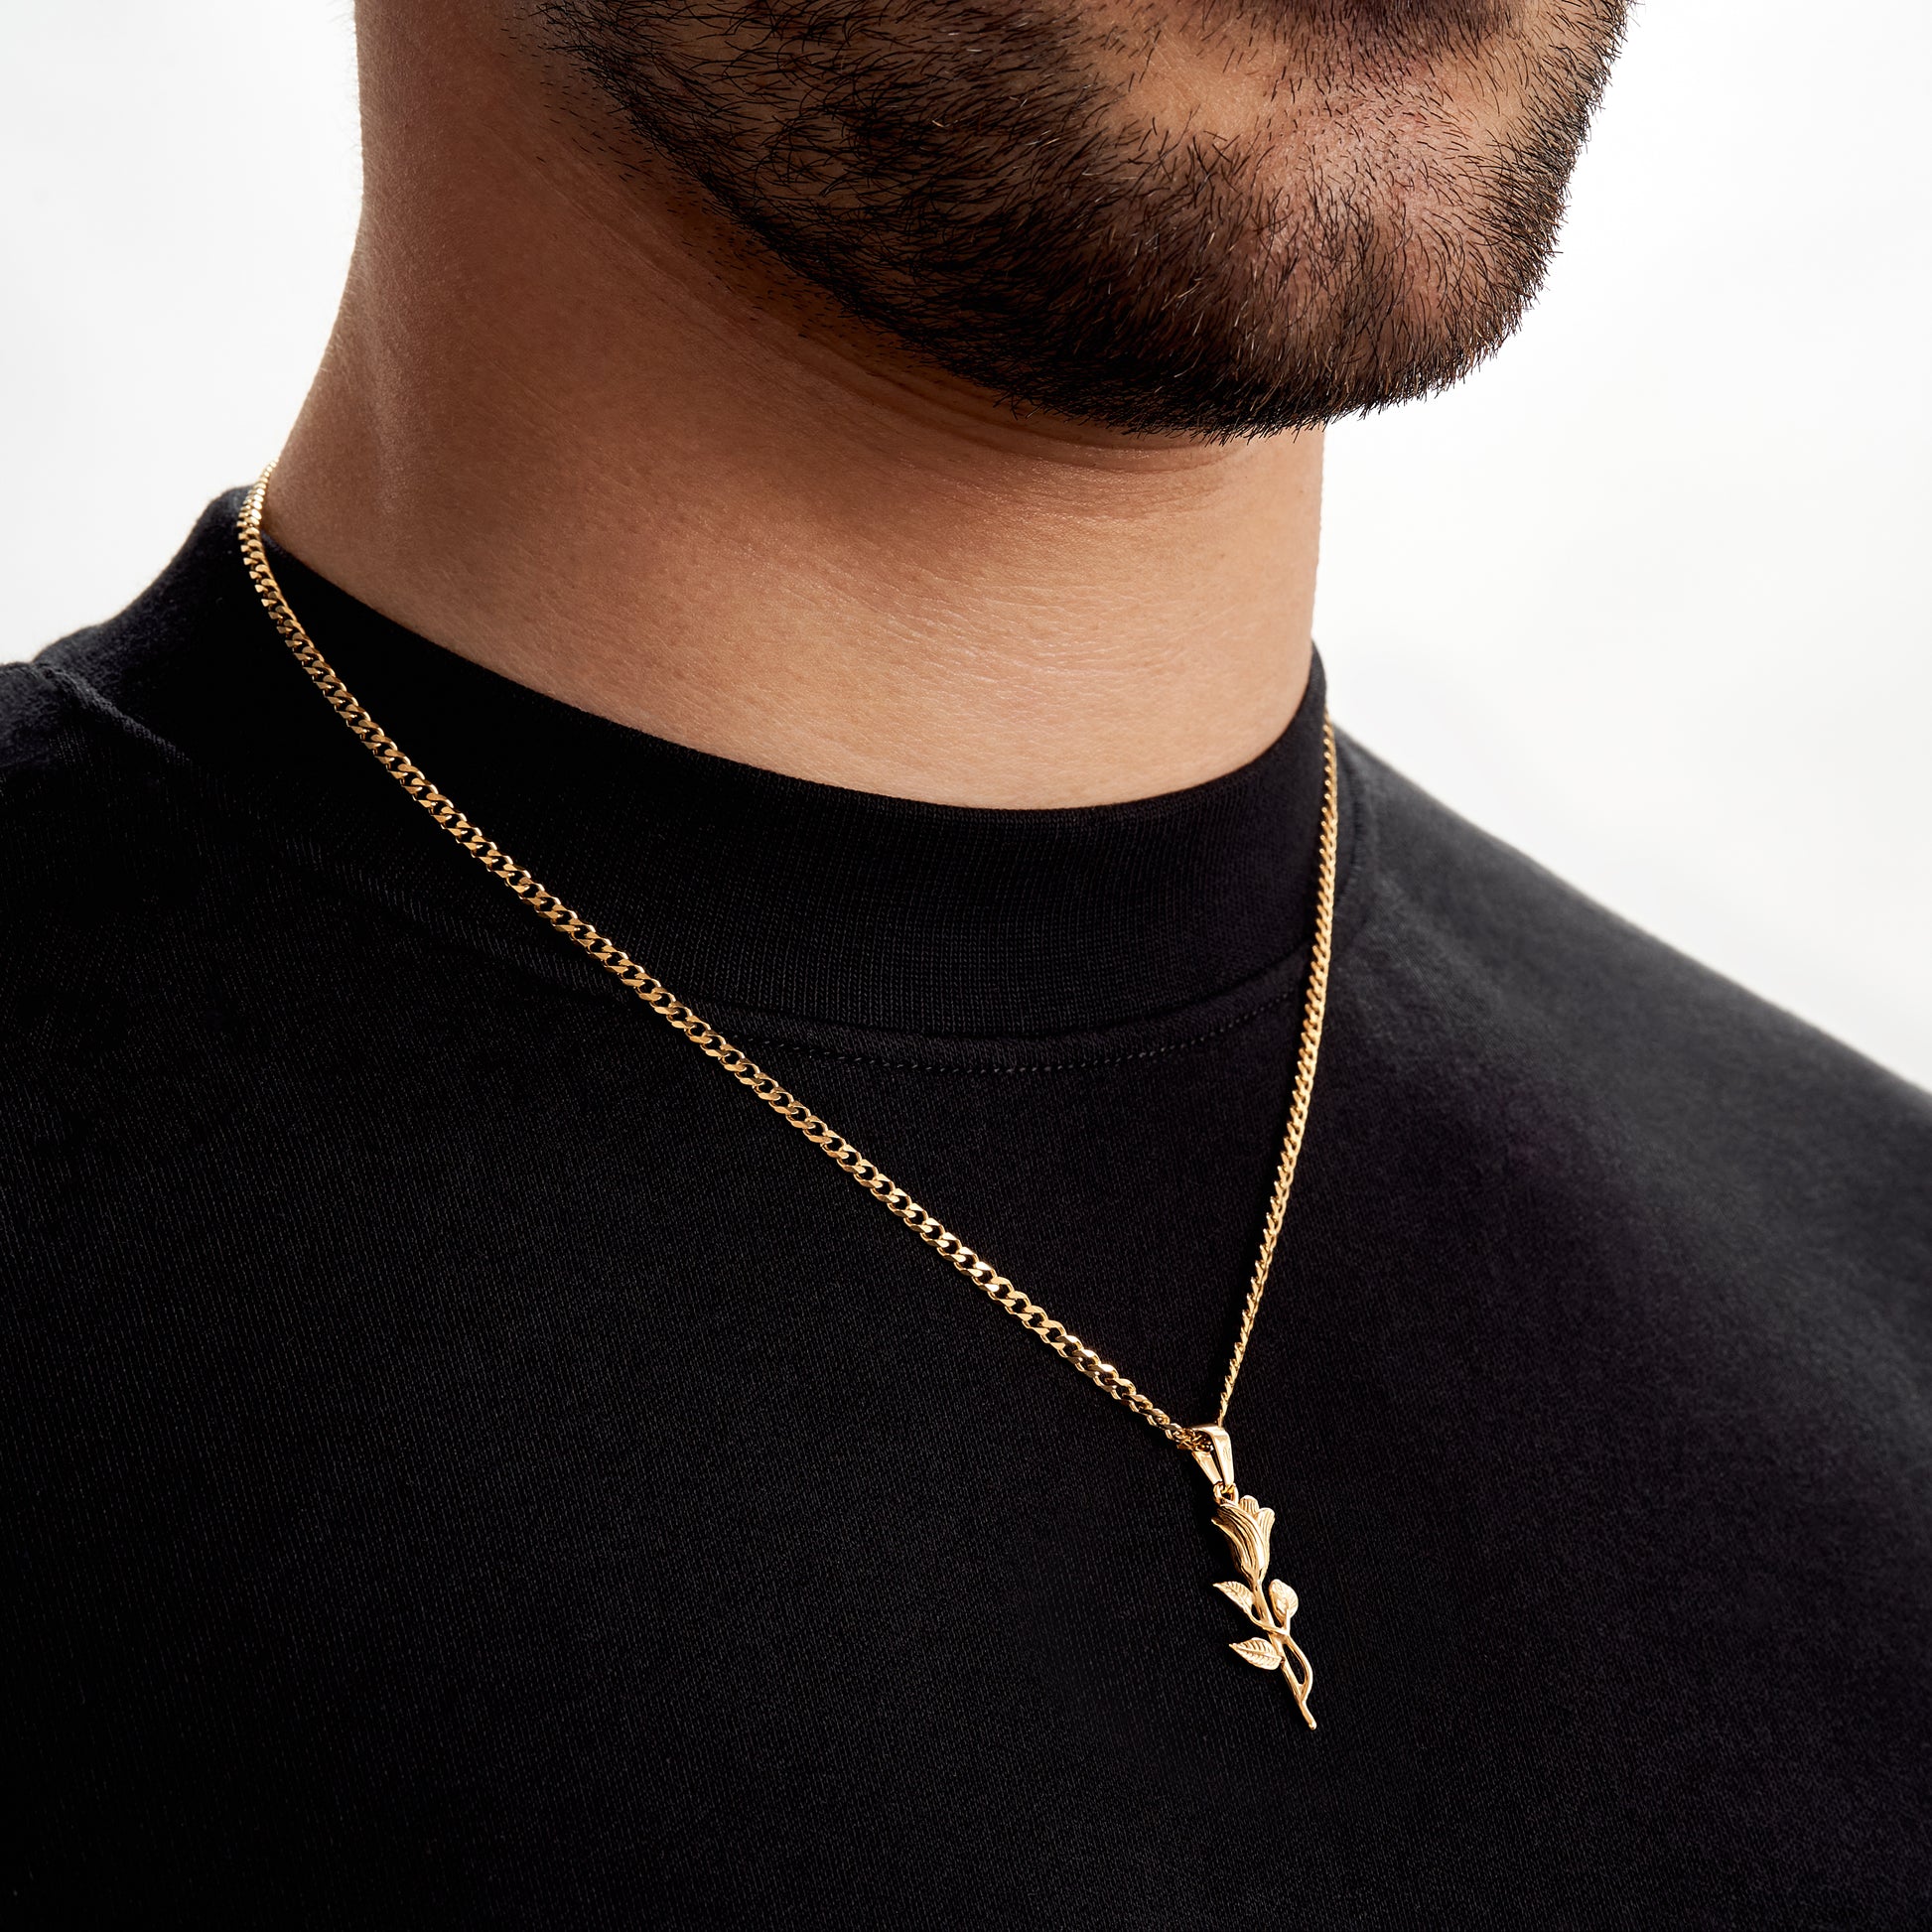 rose gold necklace chain men's